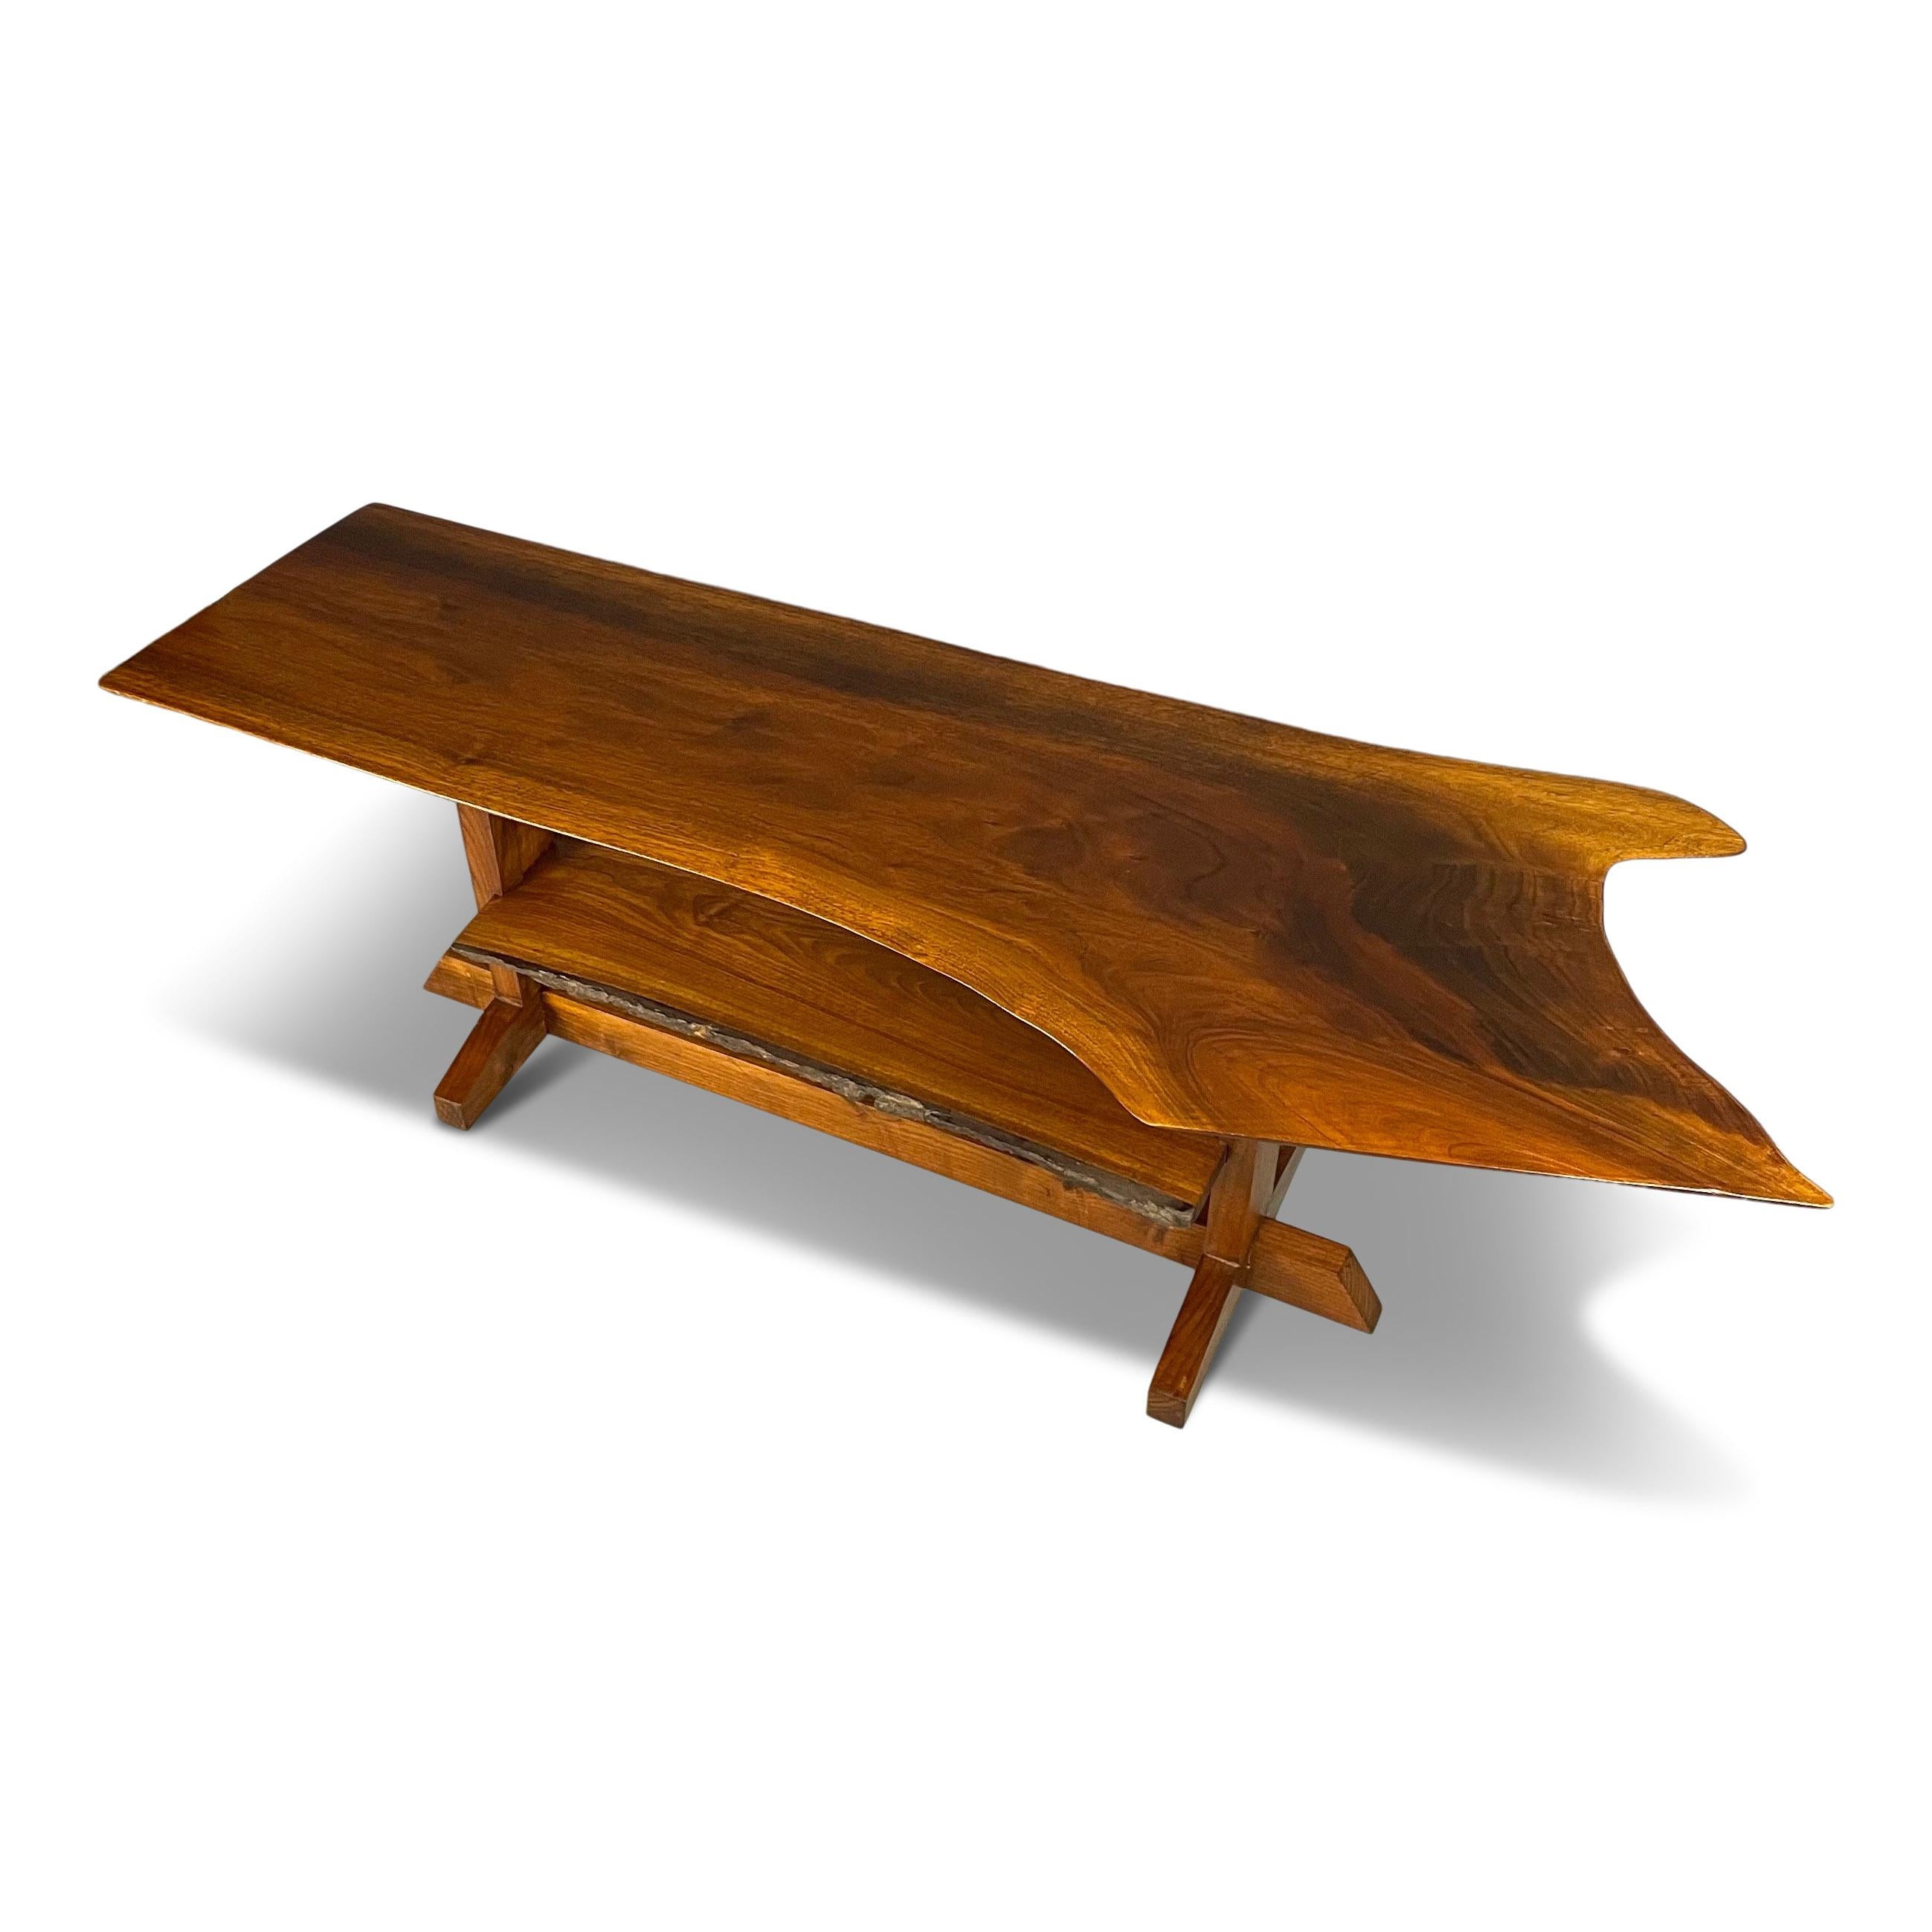 Astoundingly beautifully grained walnut slab coffee table hand made by a local Pennsylvania artisan. This table will provide a lovely transition of the forest into your living spaces... bringing the outside in!.